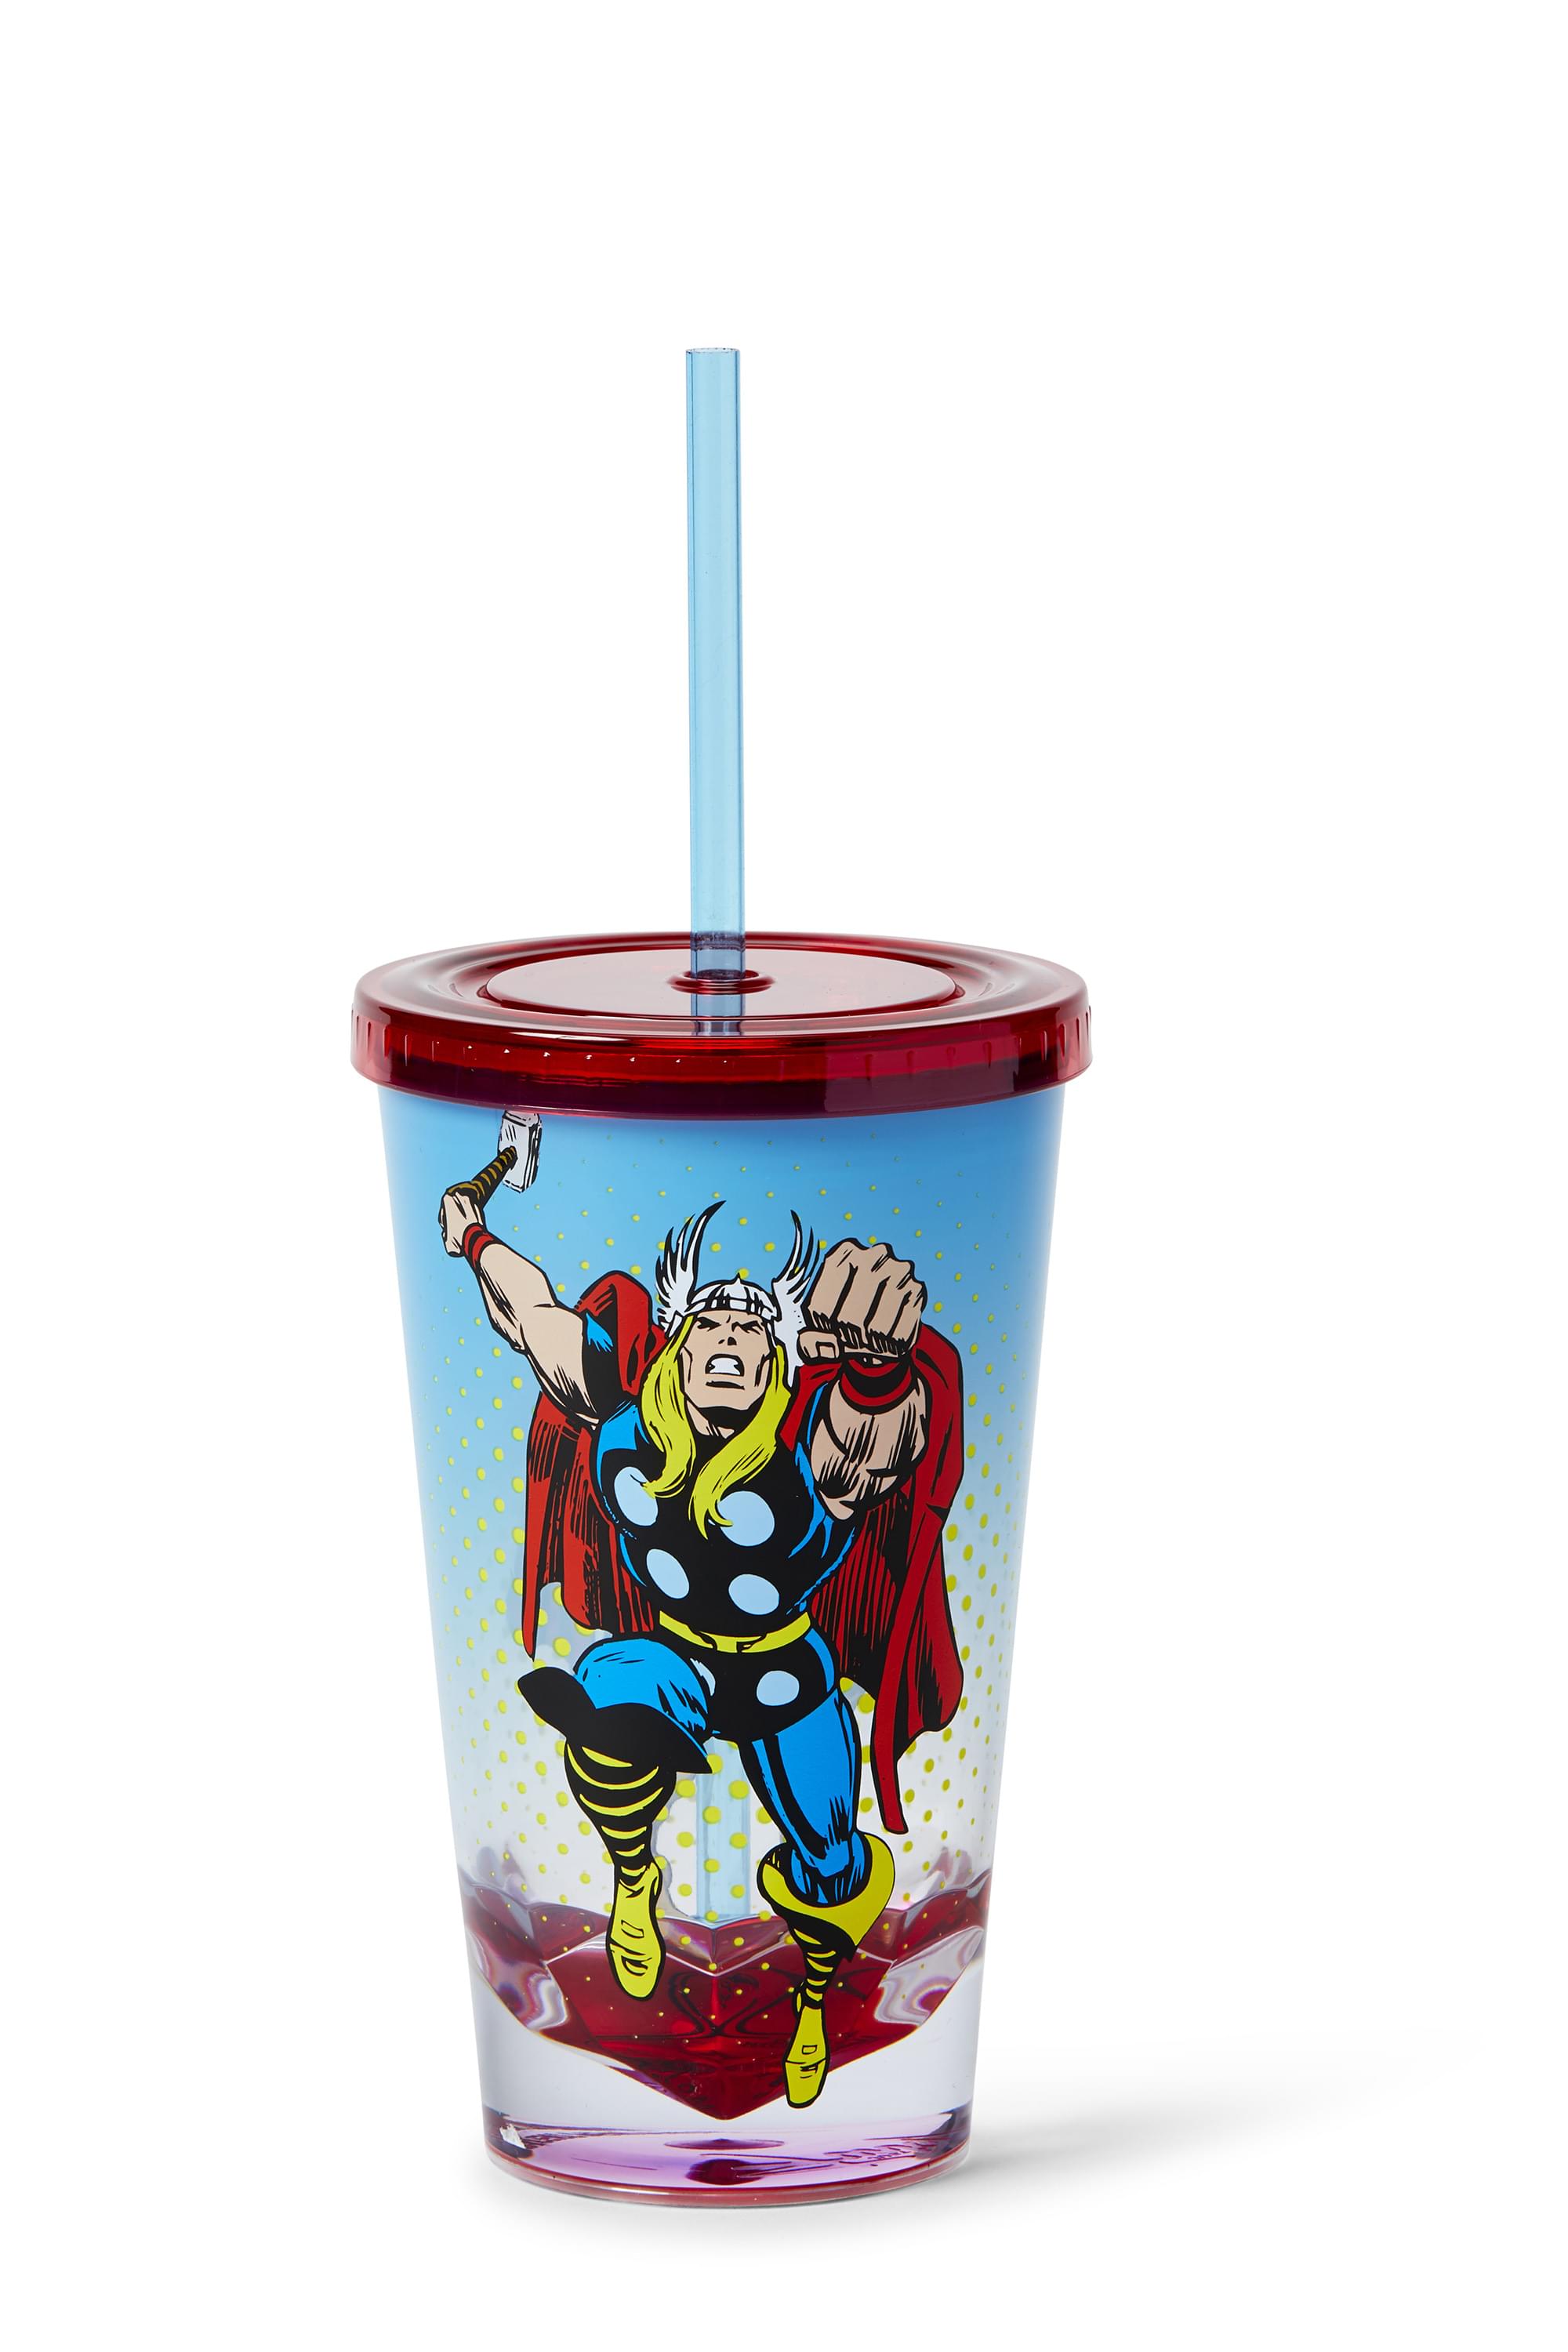 Marvel Thor God Of Thunder Plastic Tumbler Cup Lid & Straw , Holds 19 Ounces